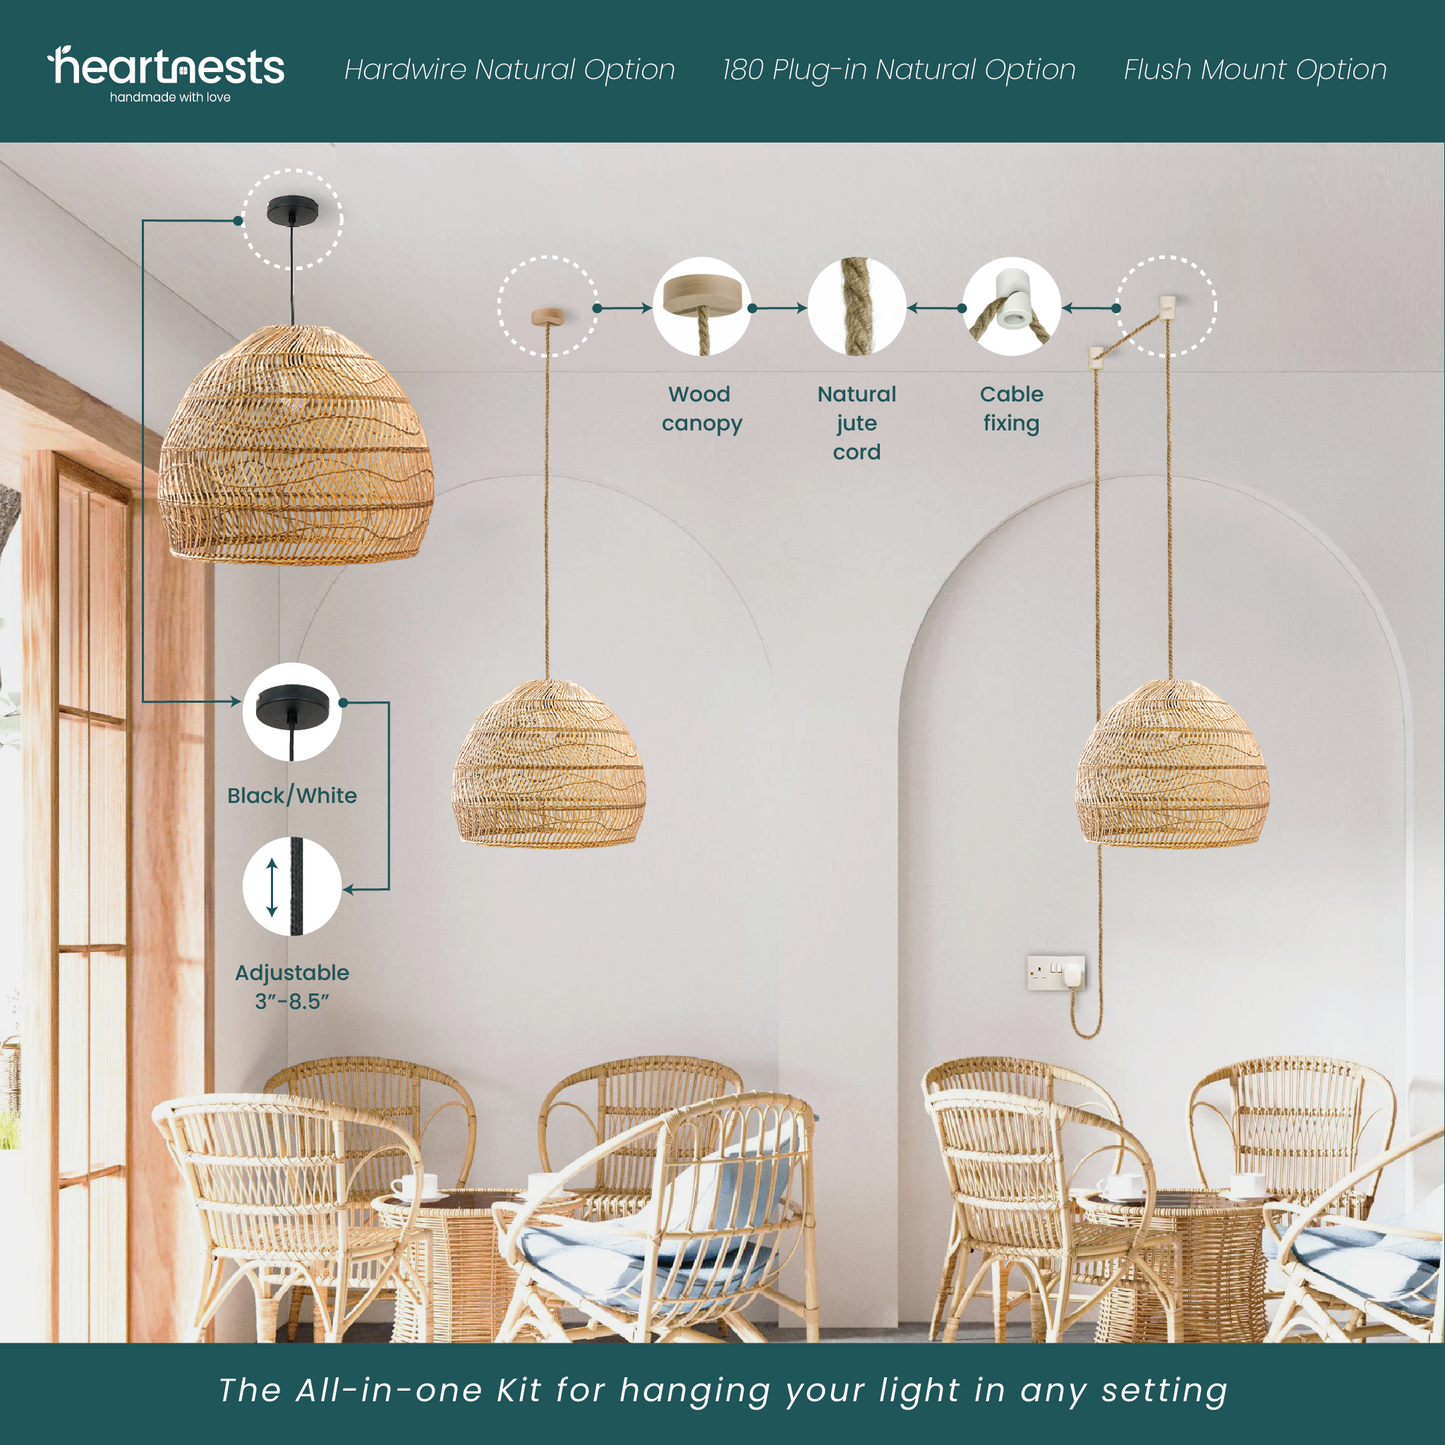 Design's guide how to hang Heart Nests's pendant light